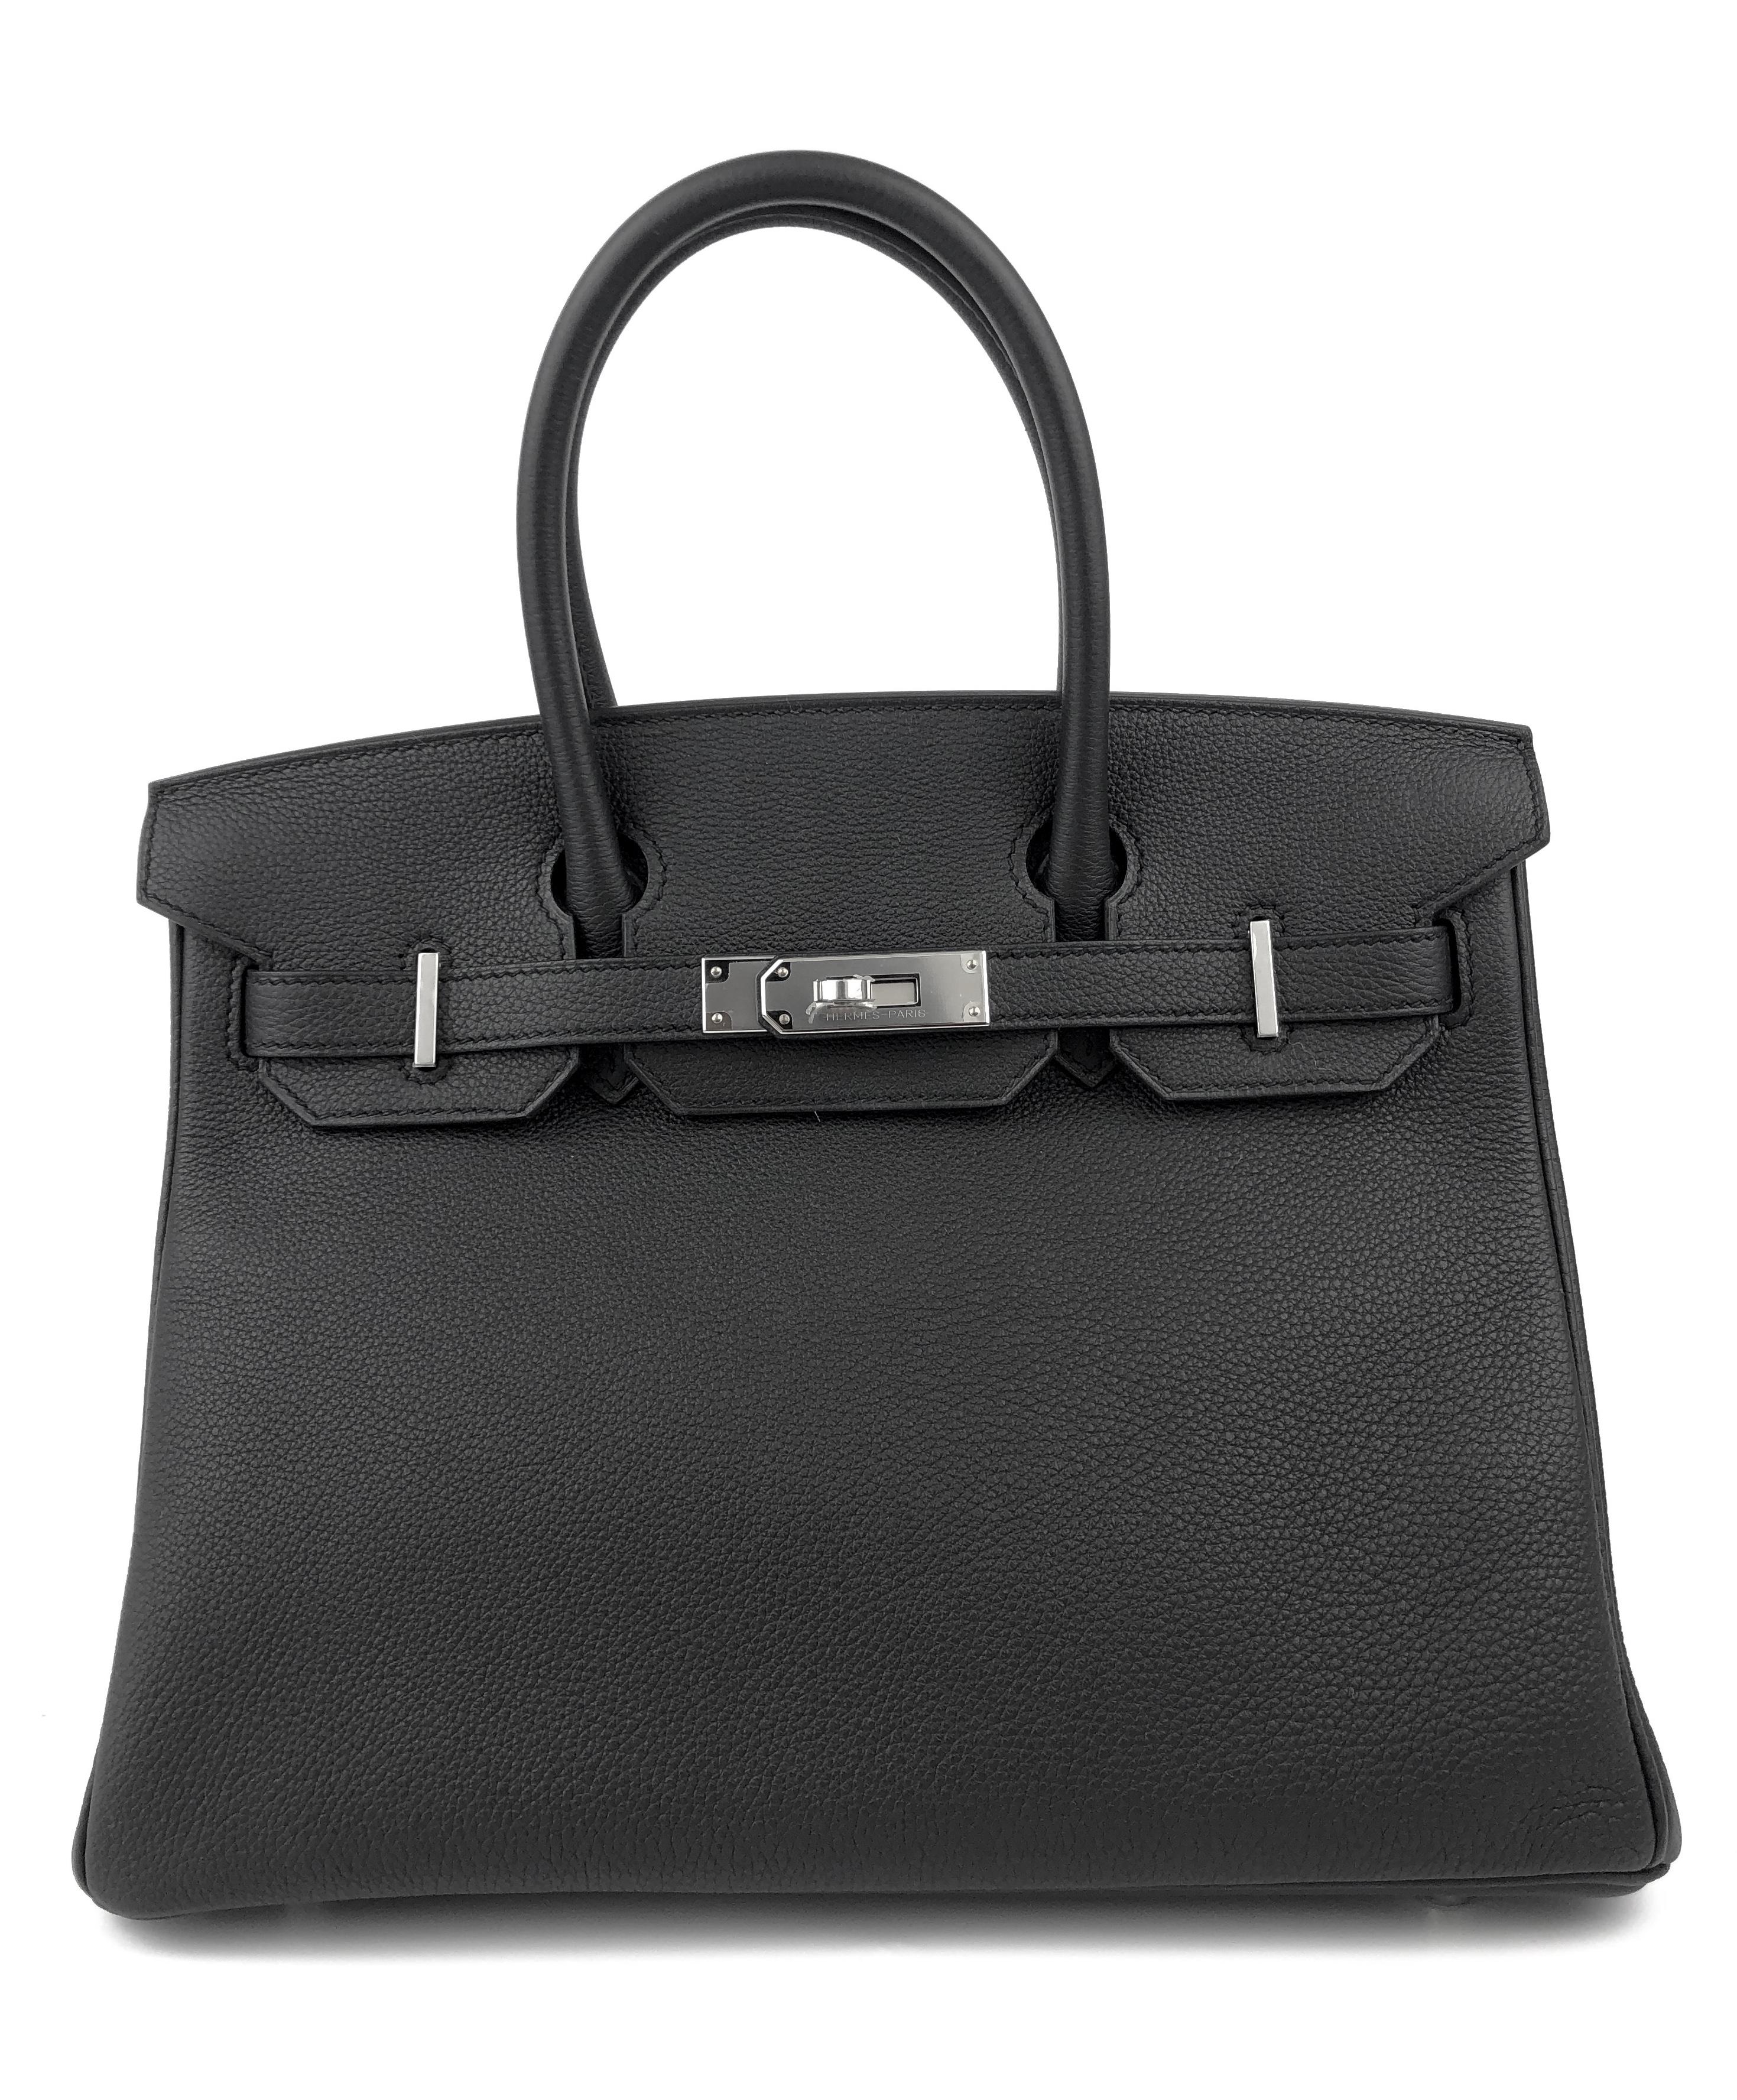 NEW 2020 Stunning Hermes Birkin 30 Black Noir Togo Palladium Hardware. Y Stamp 2020.

Shop with Confidence from Lux Addicts. Authenticity Guaranteed!